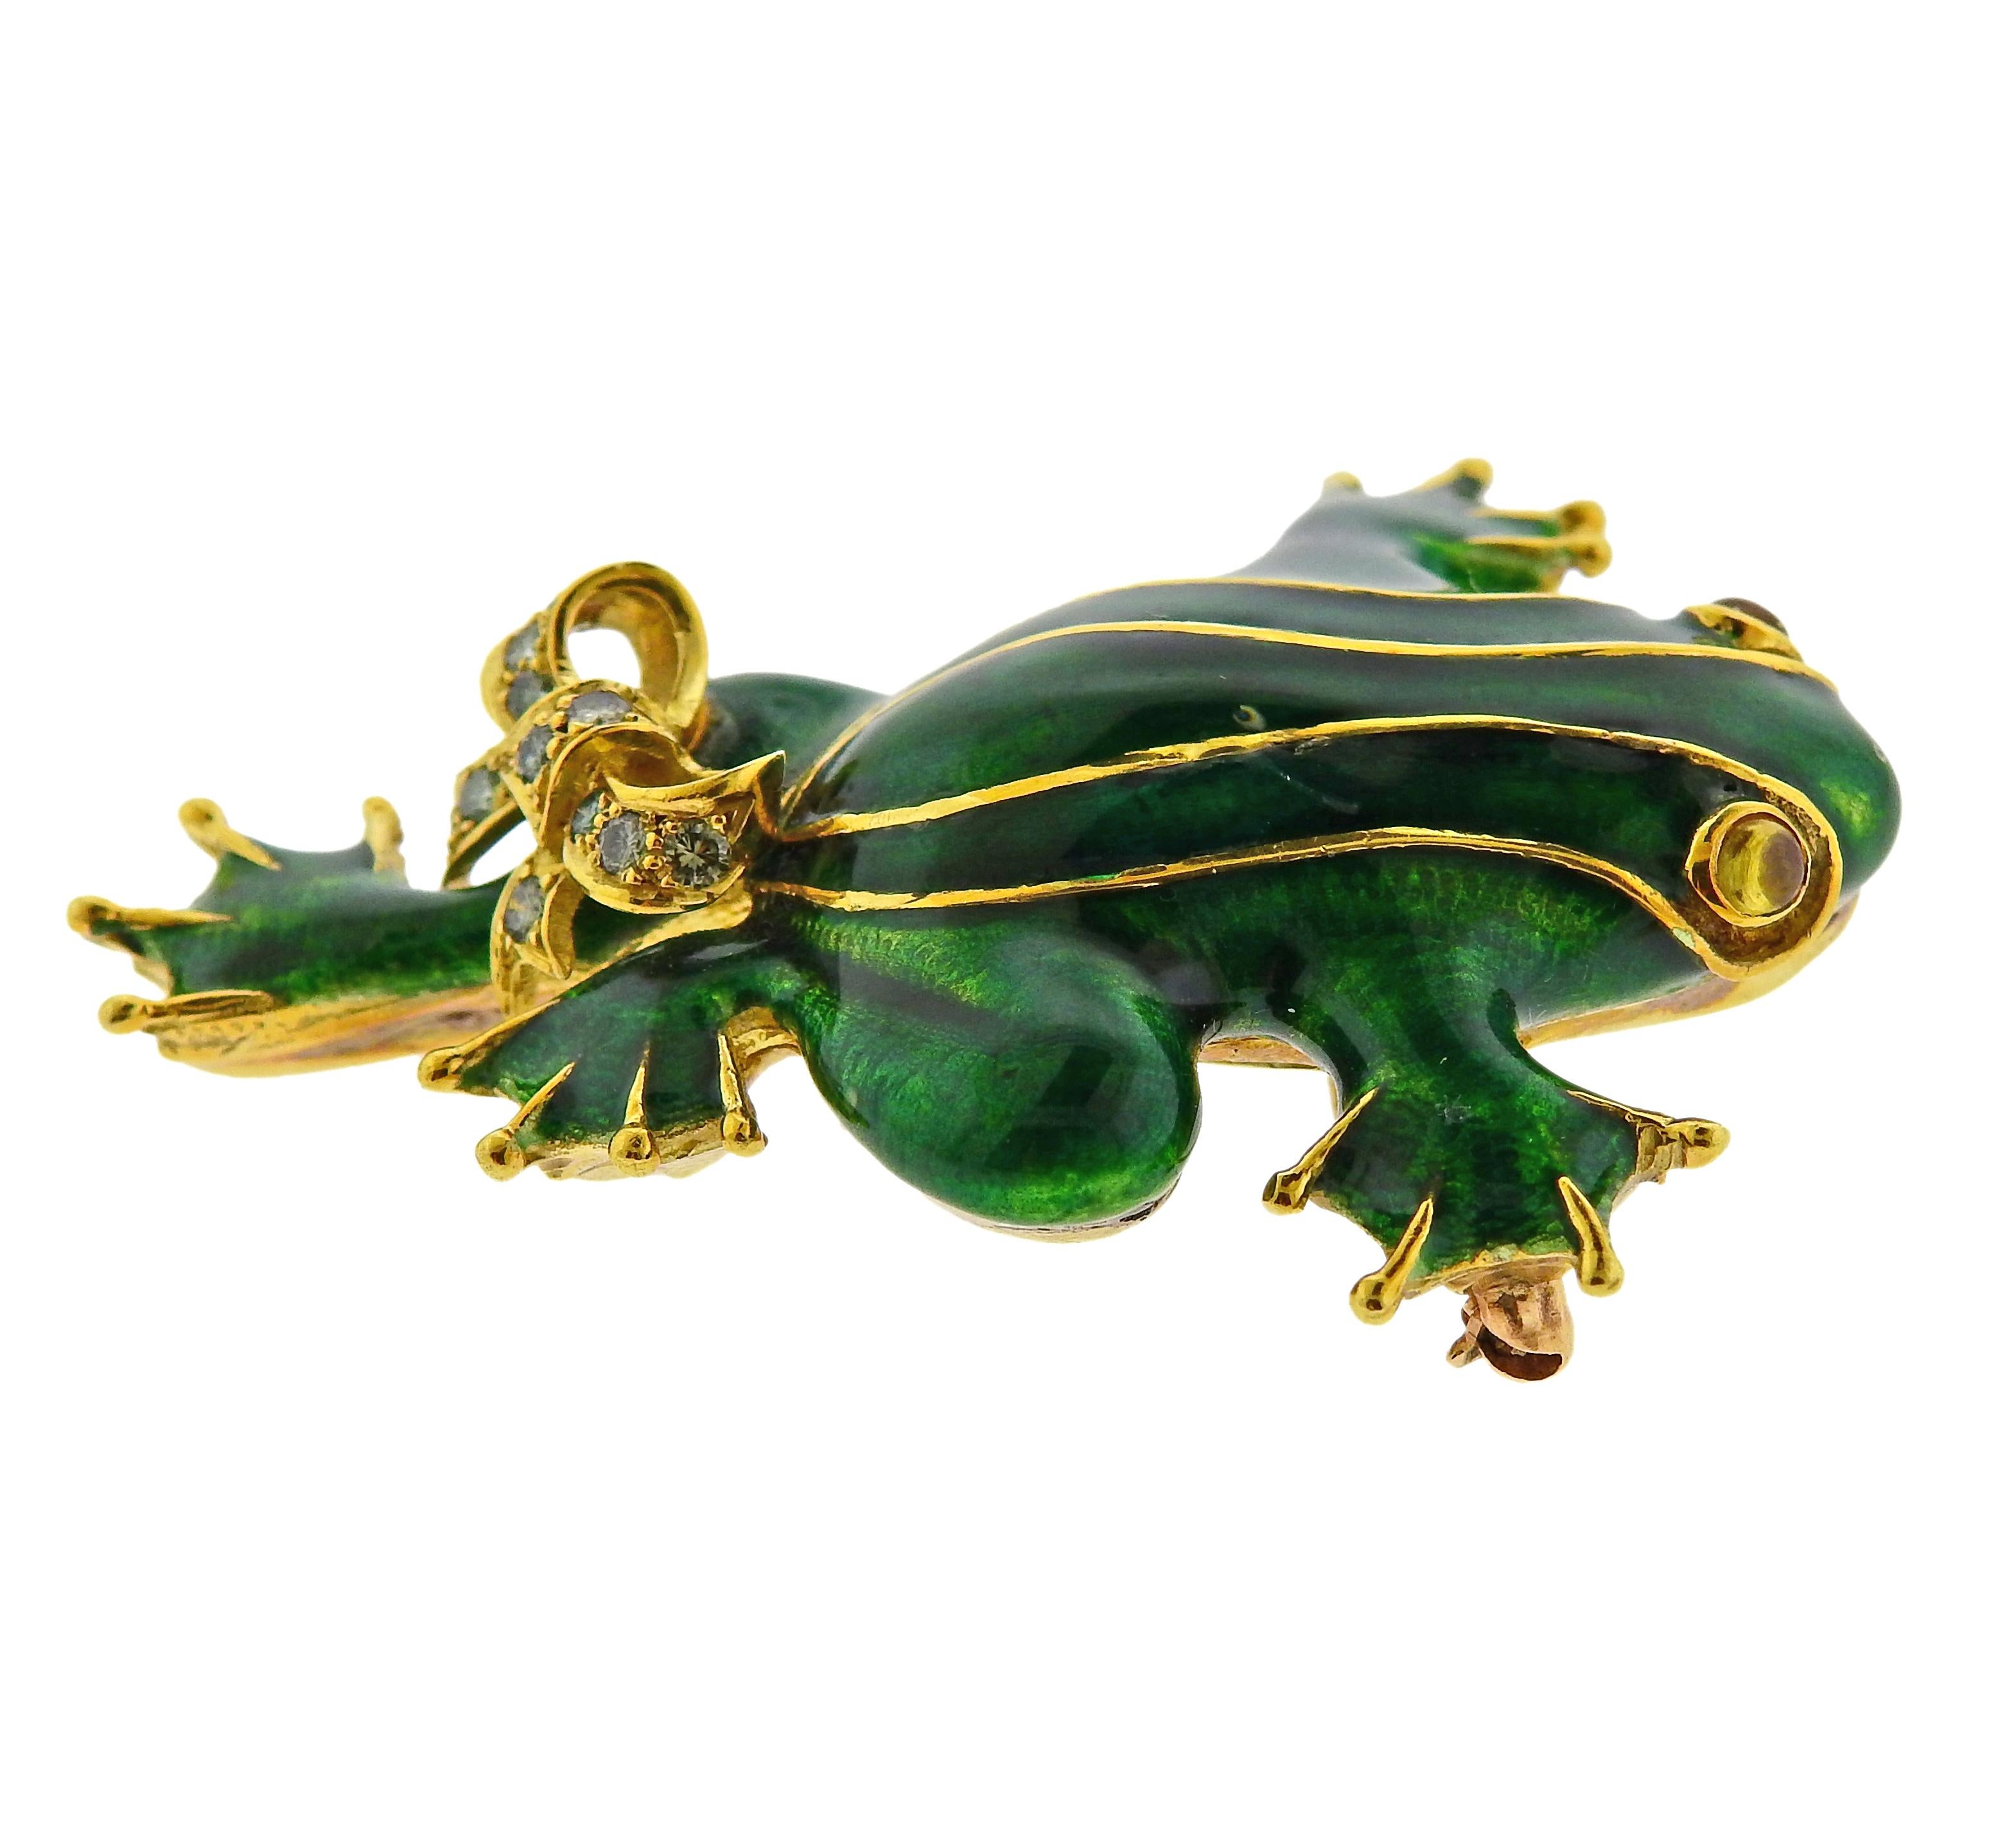 18k yellow gold and enamel frog brooch, adorned with a bow, set with approx. 0.20ctw in fancy bluish/teal diamonds and citrine cabochon eyes. Brooch measures 2 1/16